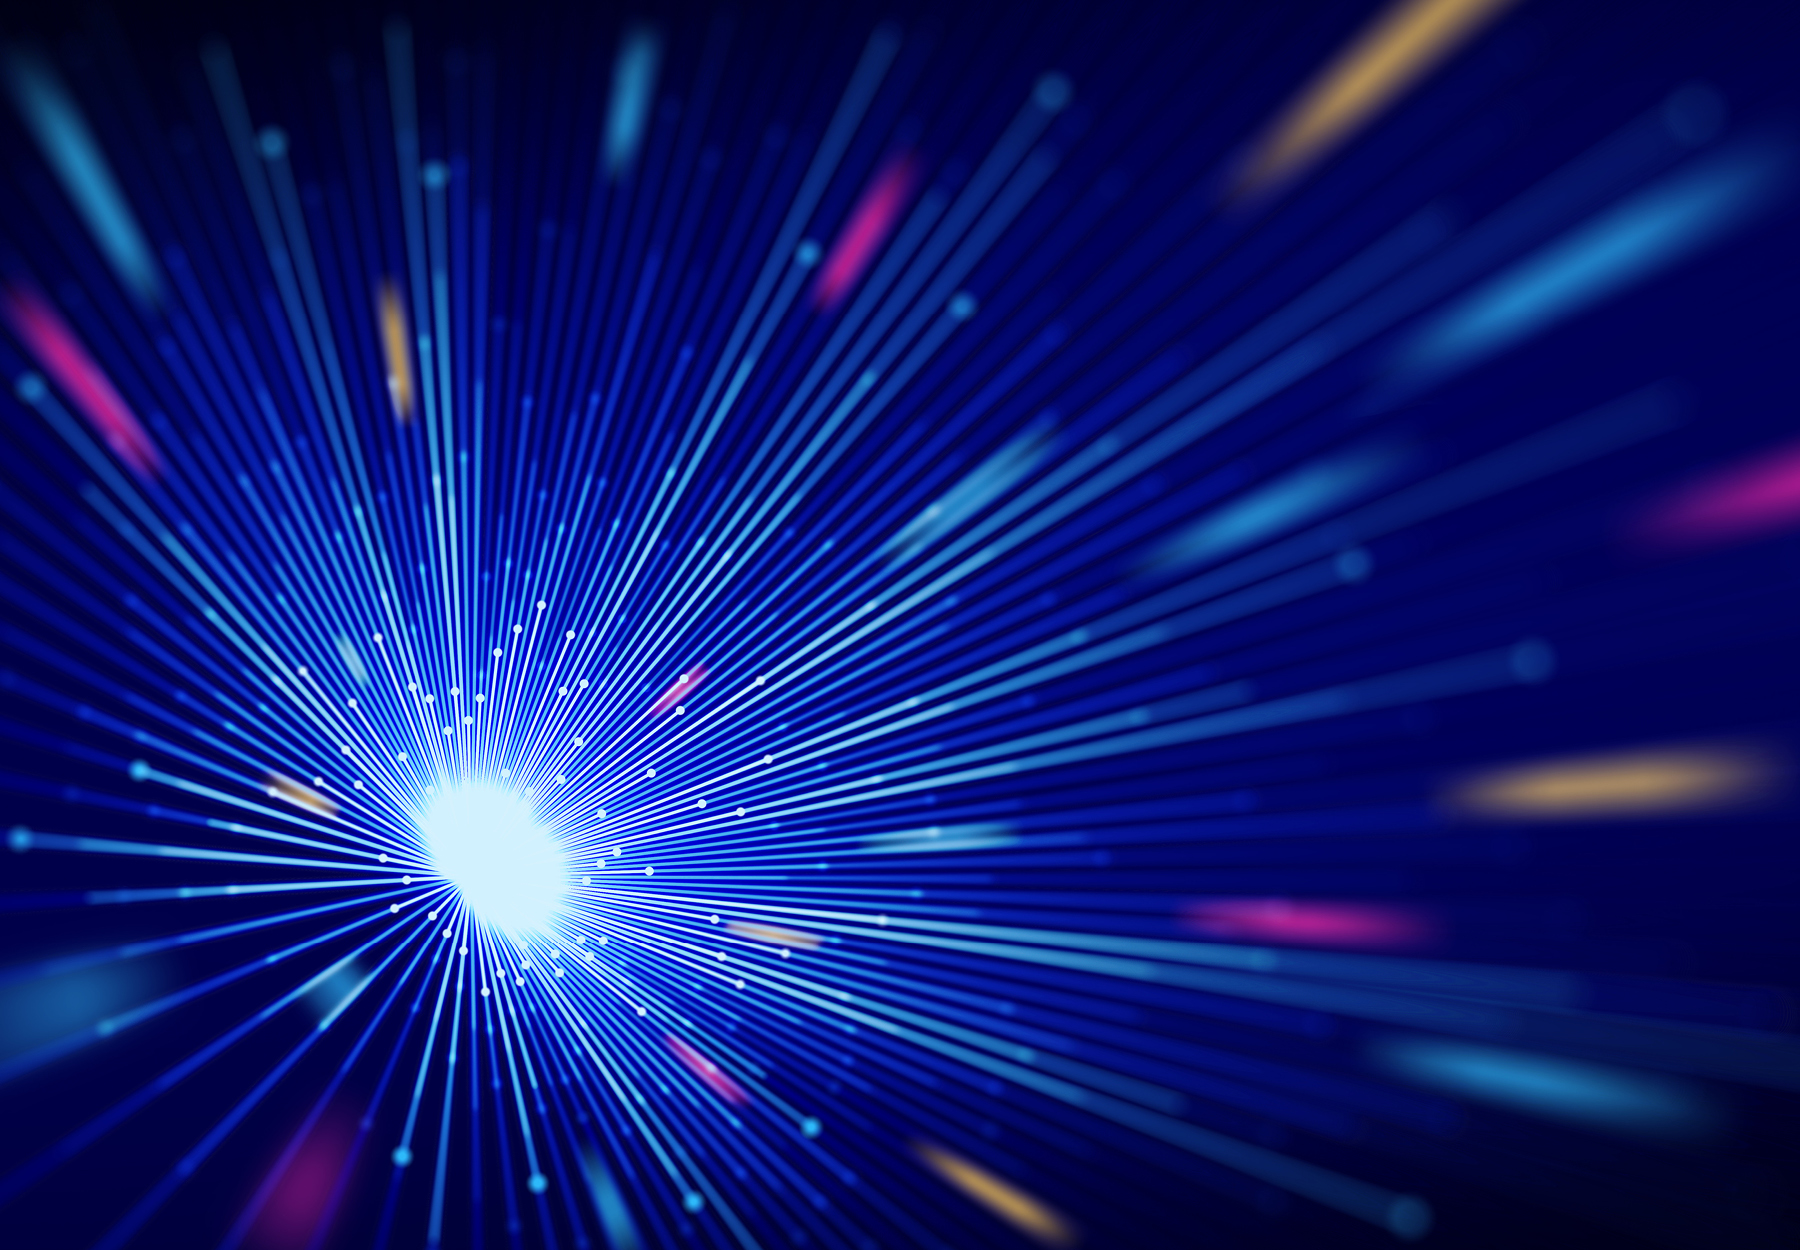 Abstract blue, red, and yellow image of light and lasers. iStock image.